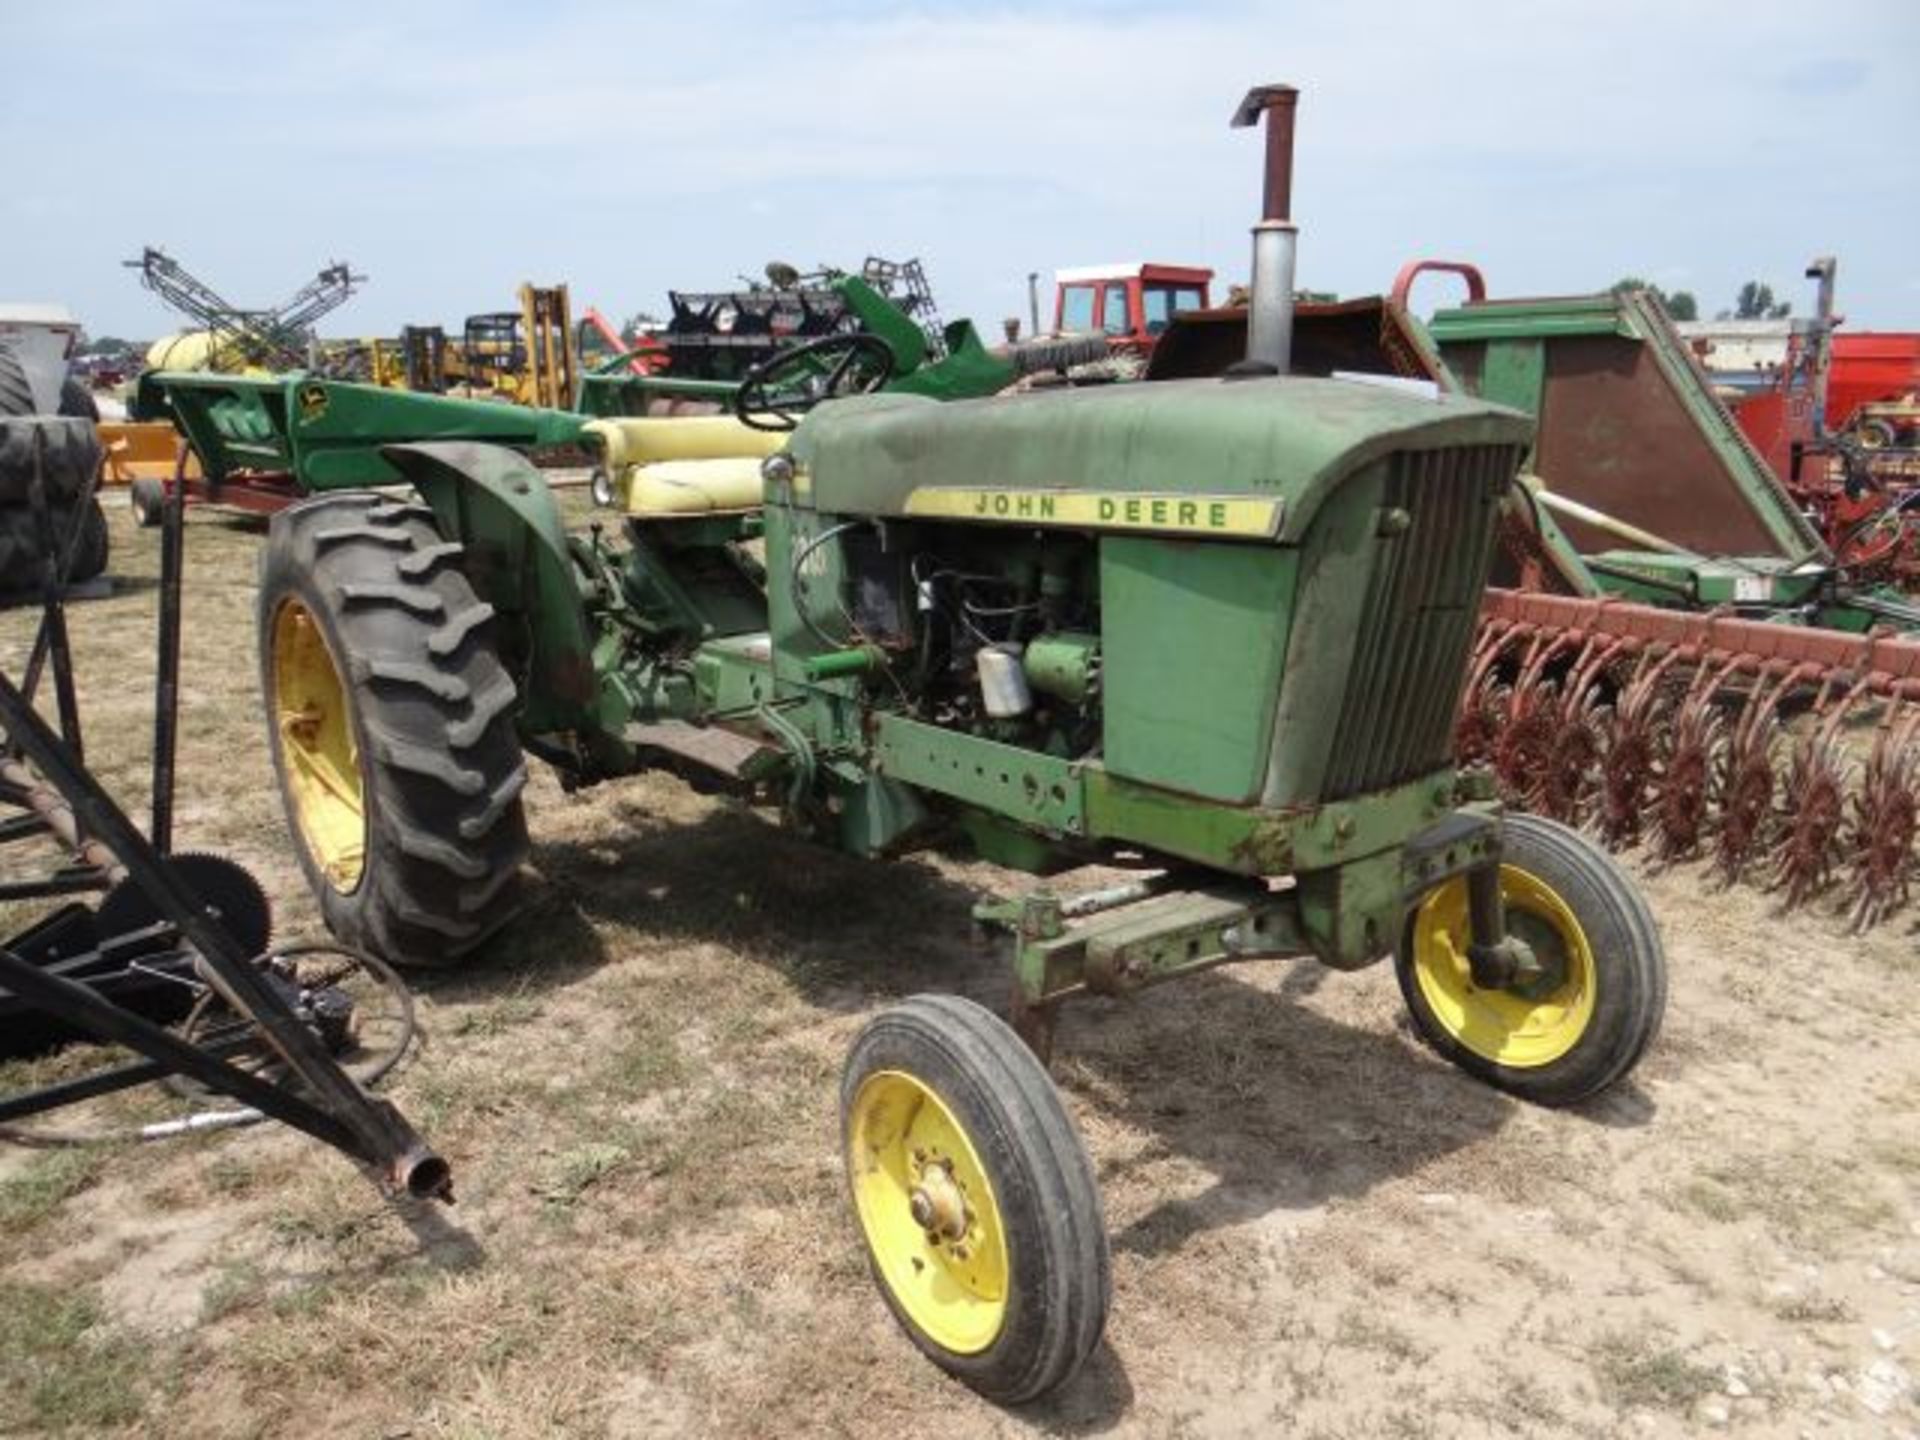 JD 2010 Tractor Gas, 3pt, WF, All Works Good - Image 2 of 4